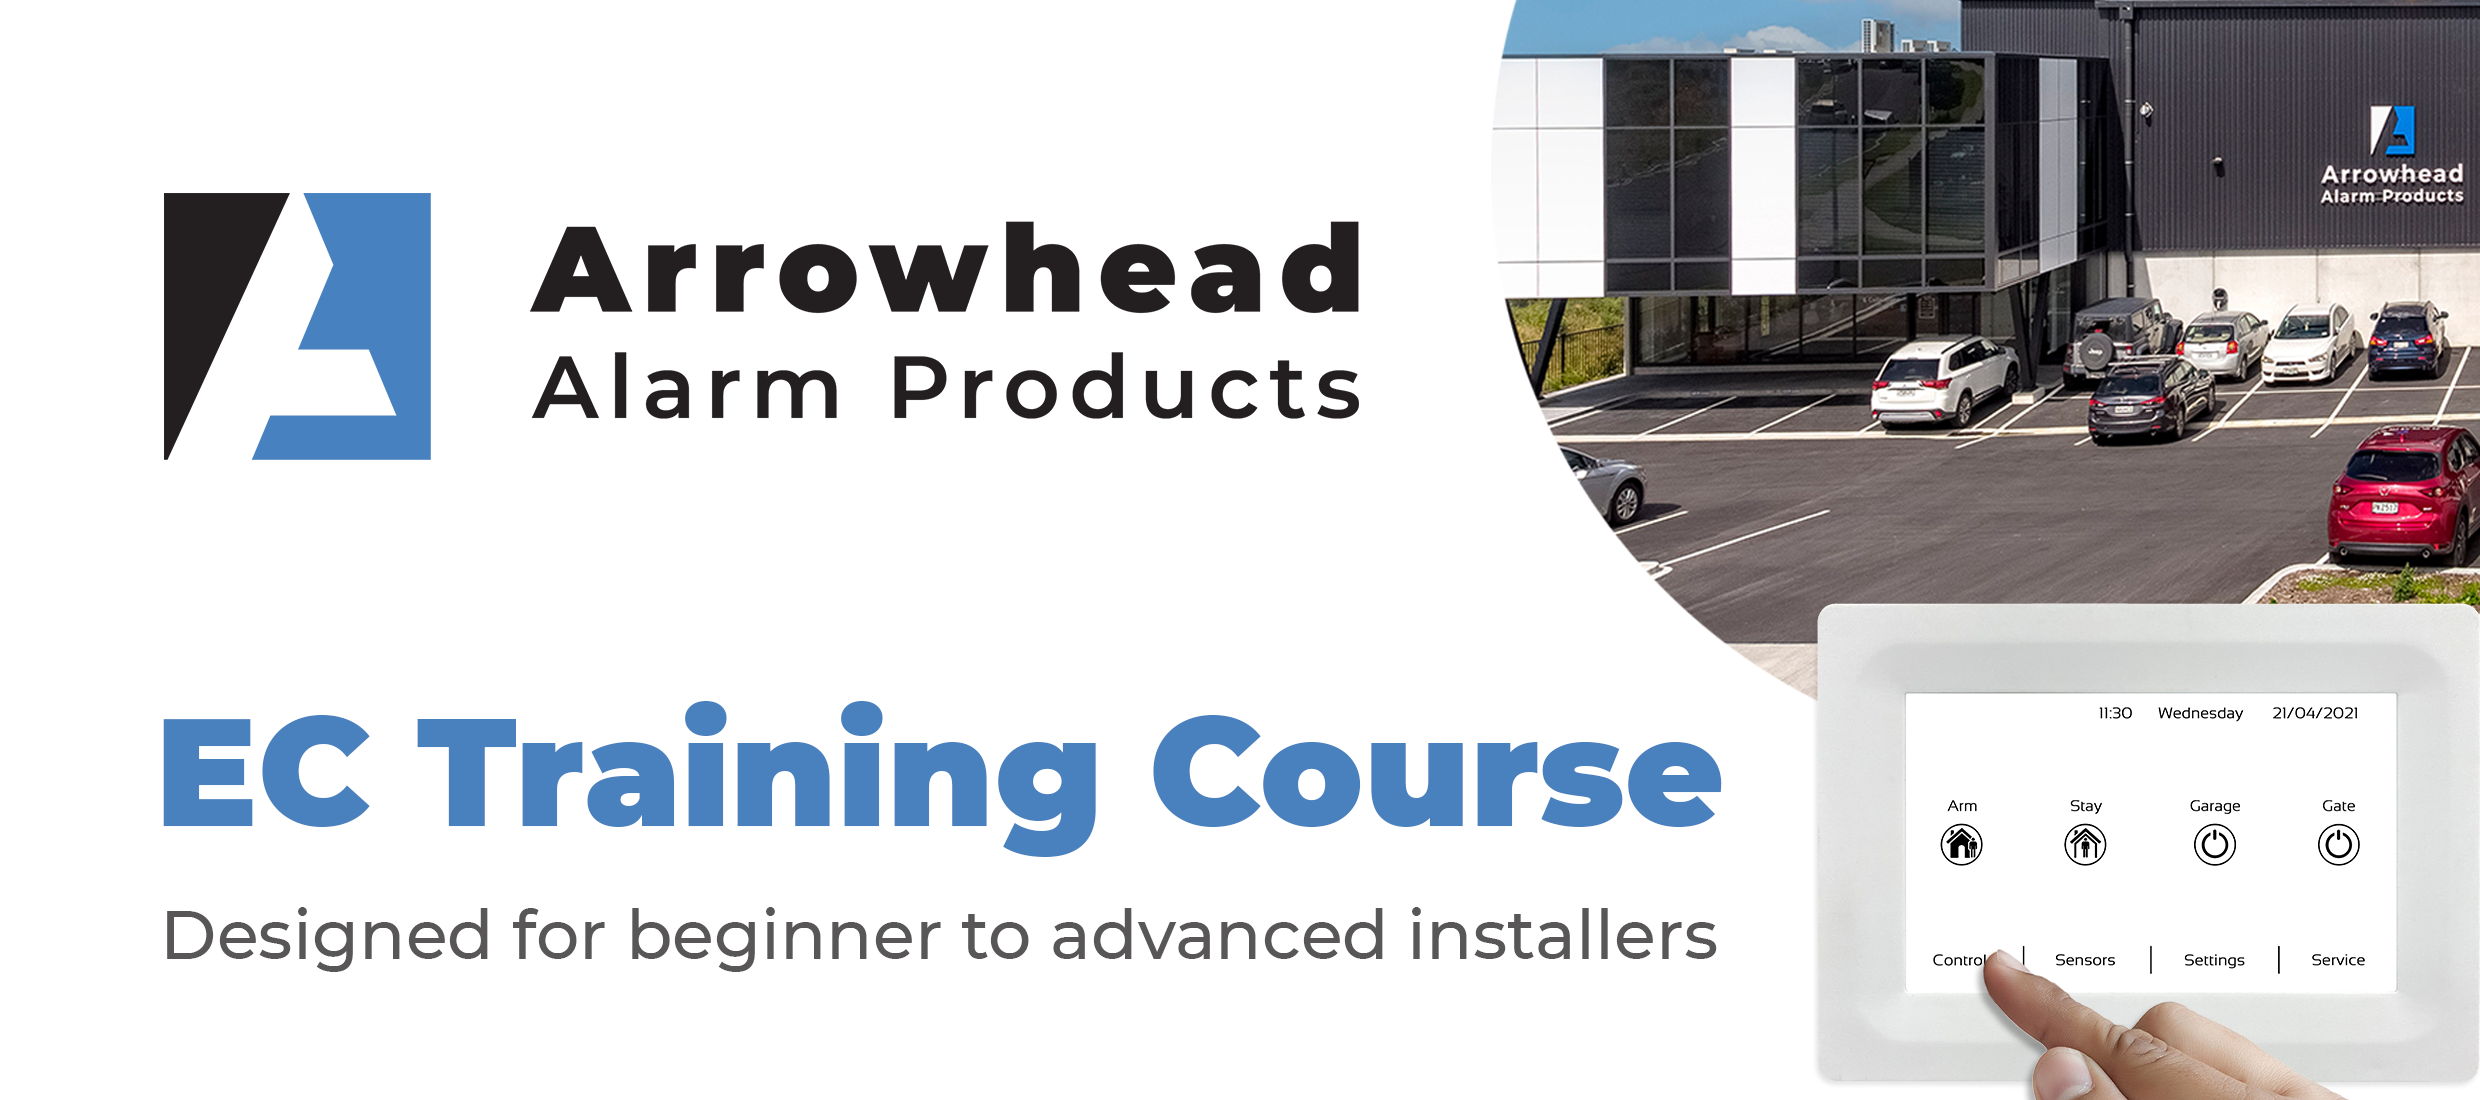 Website Banner - Training Course 24